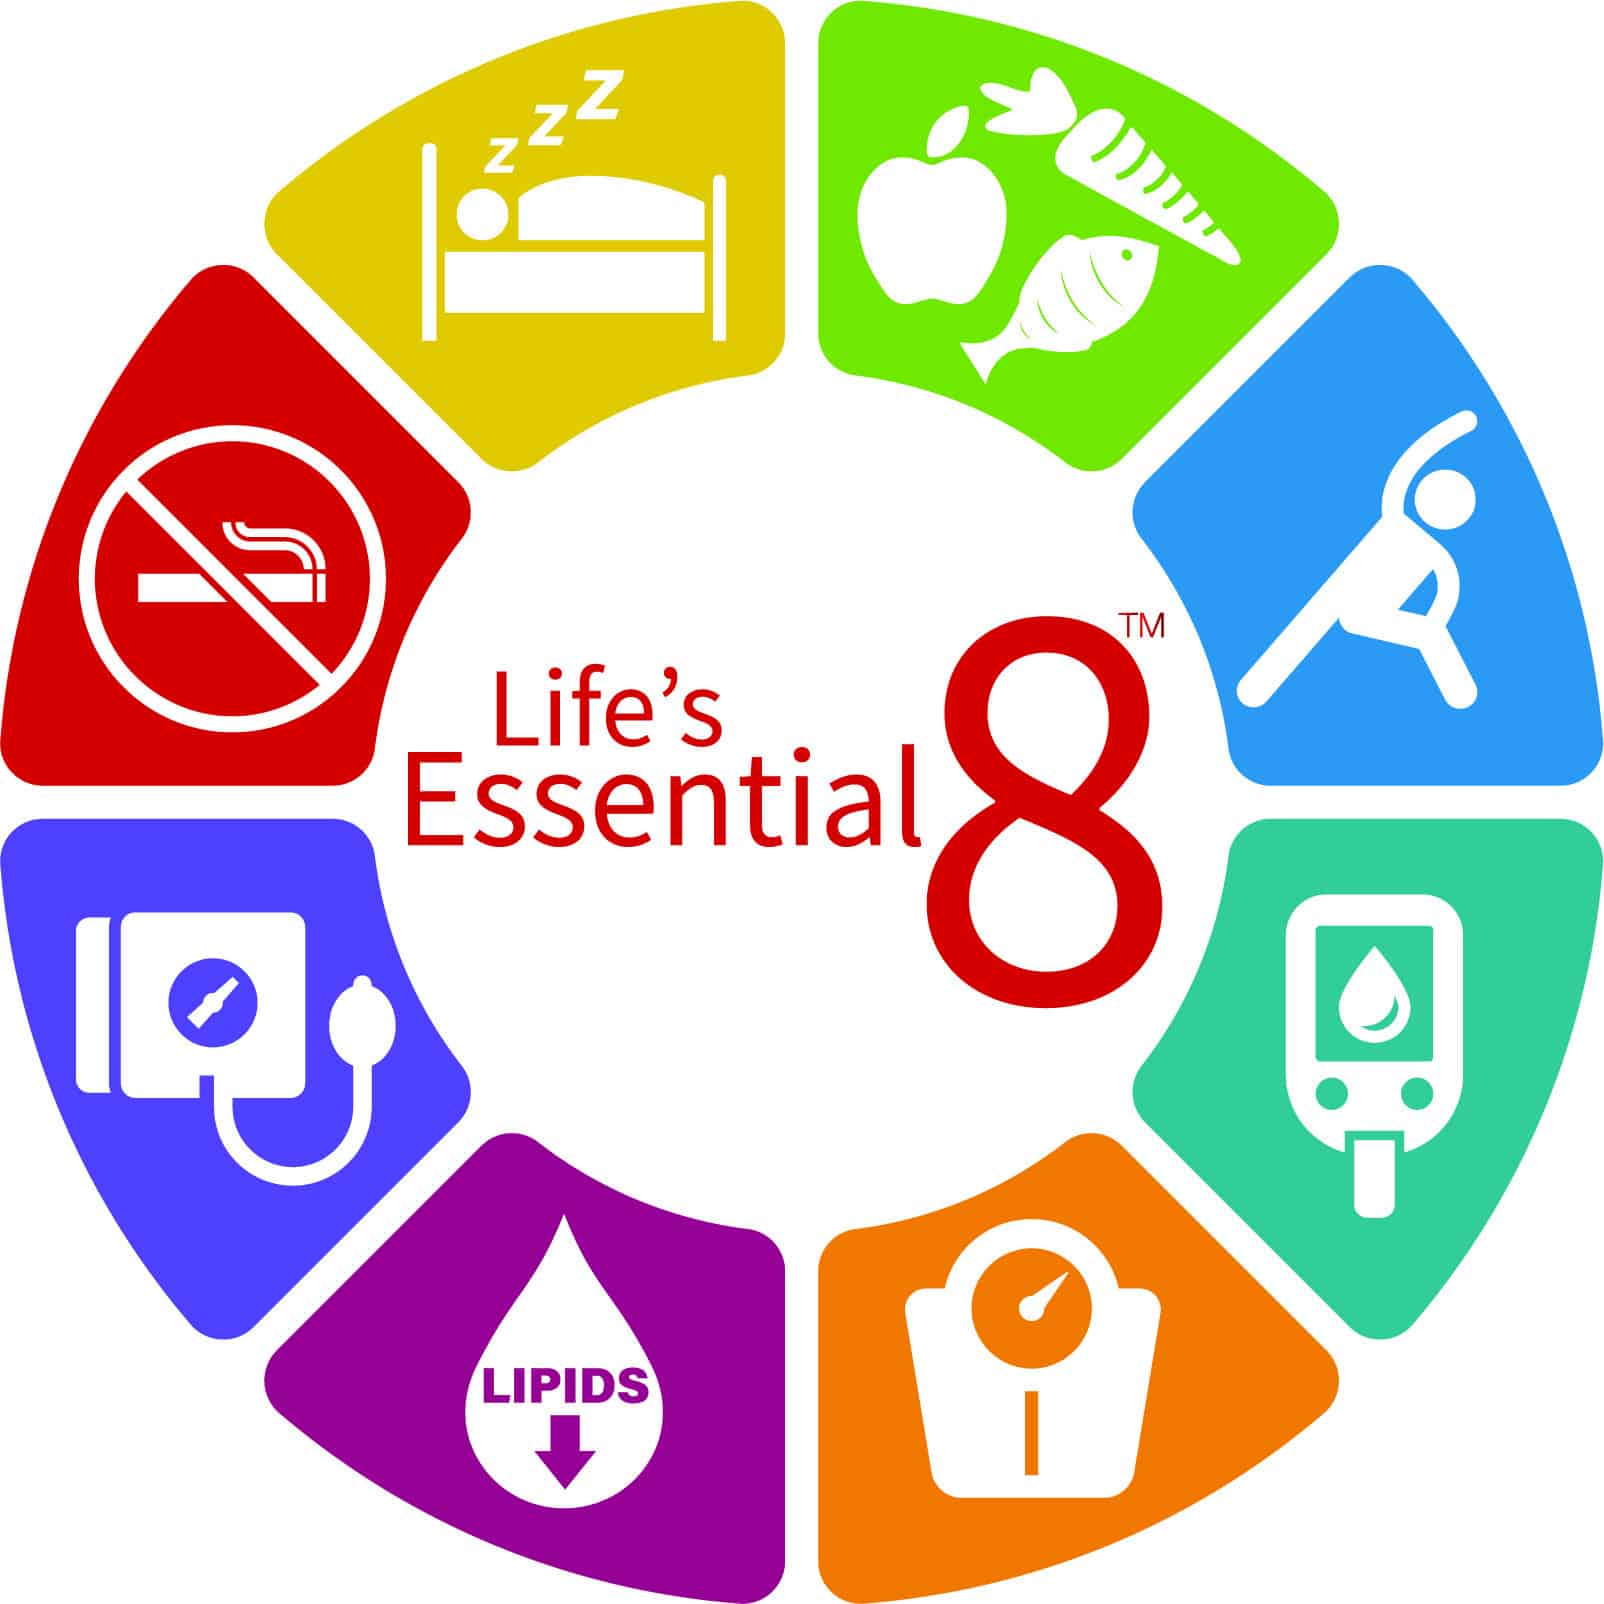 Life's Essential 8 - Dr. Axe